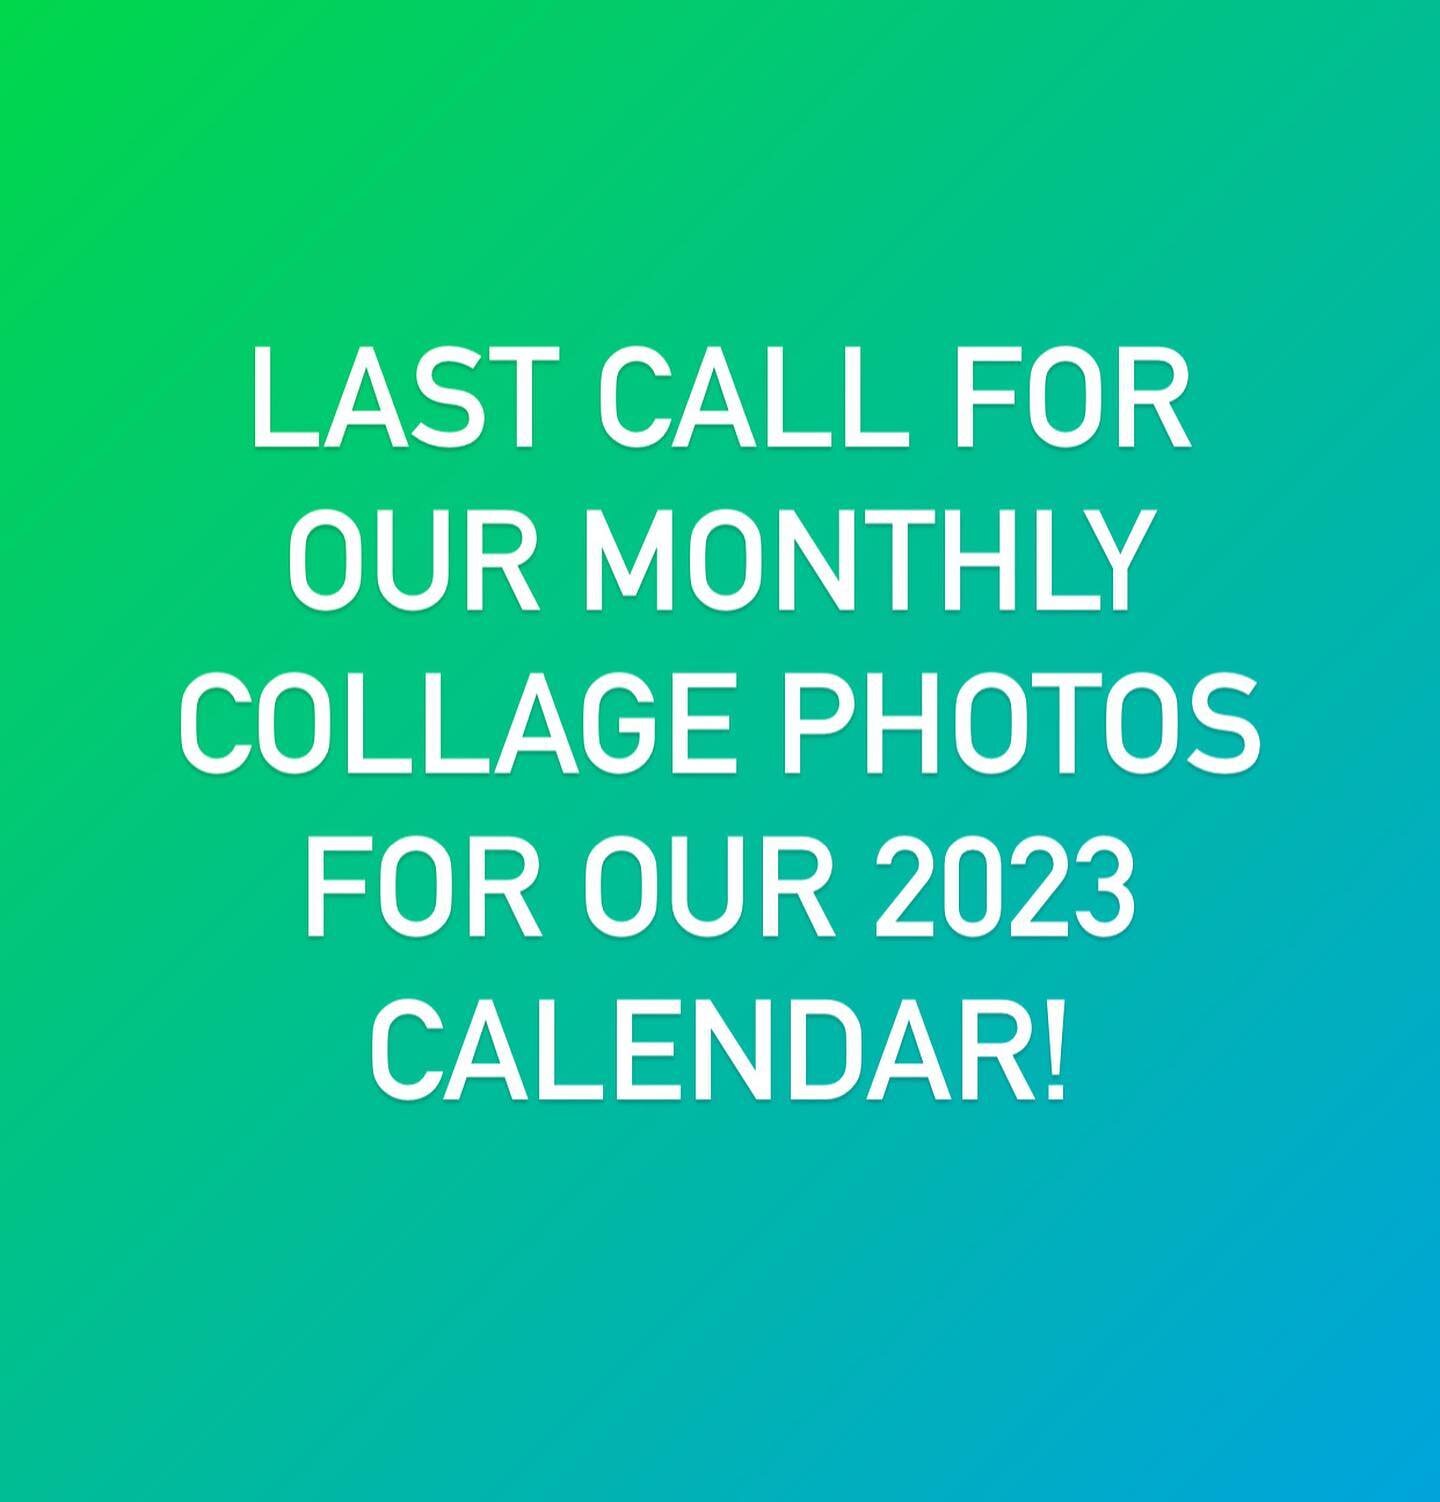 We want to include your Nashville Cav in our 2023 Calendar! If you&rsquo;d like to be included, please email us a photo of your Cav(s) to nashvillecavalierscalendar@gmail.com
We need all photos by Sunday, October 16 by 9pm. (Example of the monthly co